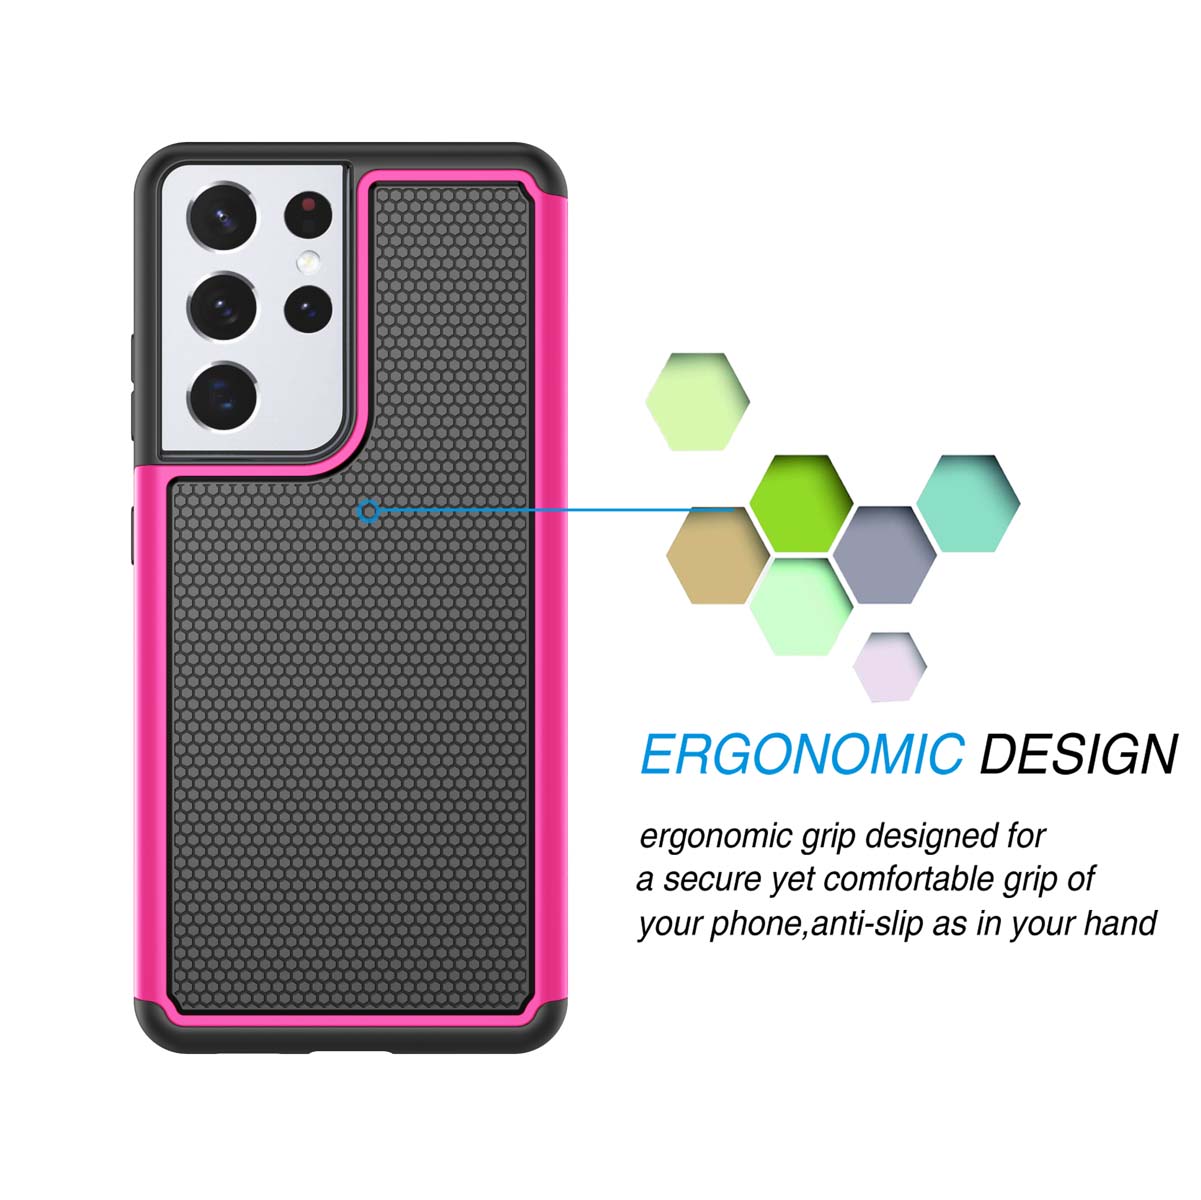 Galaxy S21 Ultra Case, Cute Case for Galaxy S21 Ultra 6.8", Njjex Shock Absorbing Dual Layer Silicone & Plastic Bumper Rugged Grip Hard Protective Cases Cover for Samsung Galaxy S21 Ultra 5G 2020 - image 3 of 9